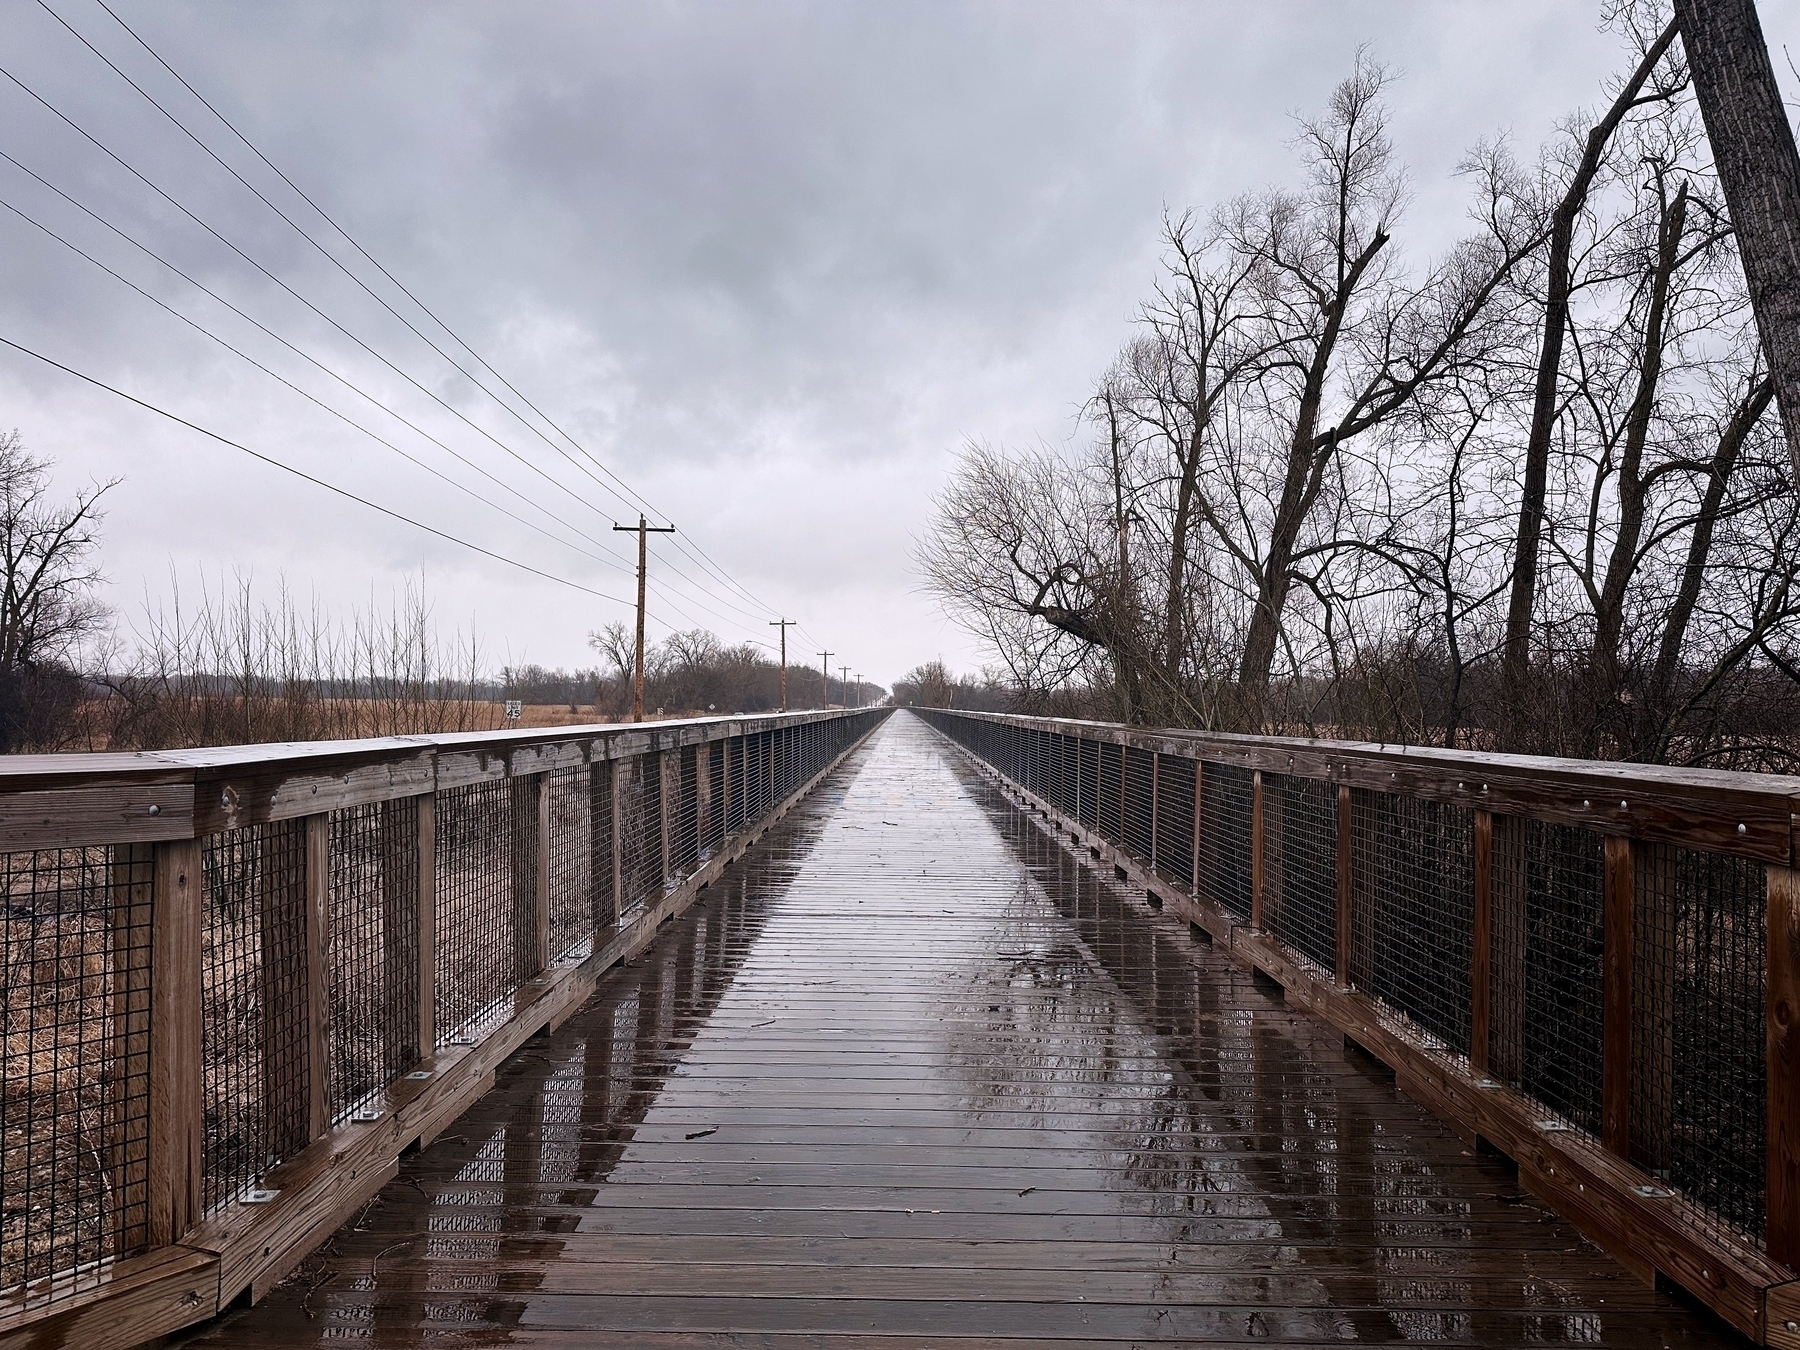 A wet wooden bridge extends into the distance on an overcast day, flanked by bare trees and power lines.